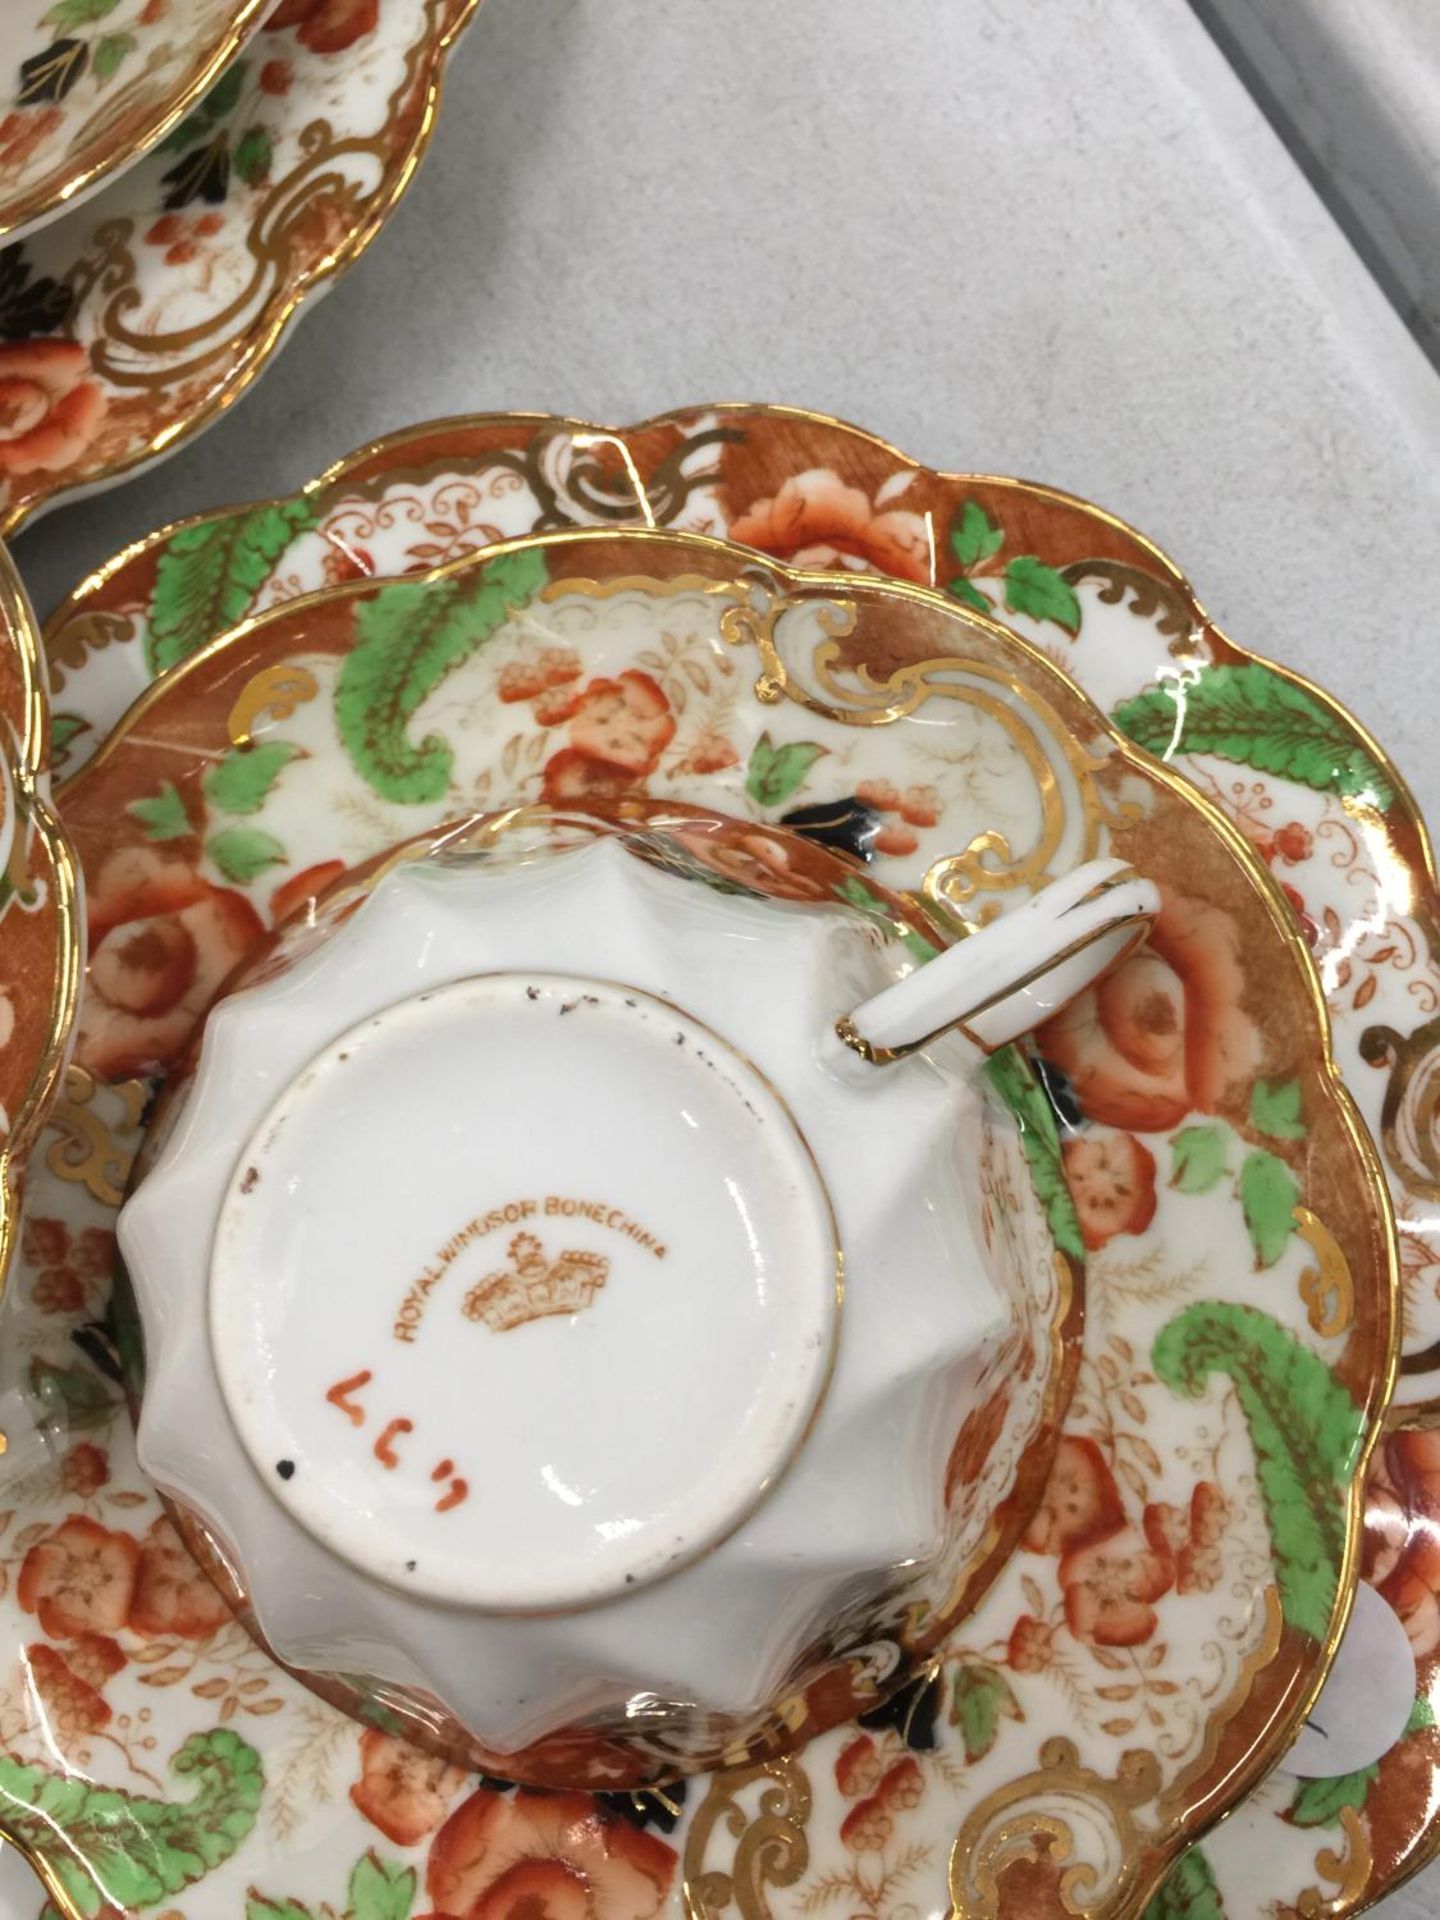 A LARGE QUANTITY OF ROYAL WINDSOR CHINA CUPS, SAUCERS AND SIDE PLATES PLUS A CREAM JUG AND SUGAR - Image 3 of 8